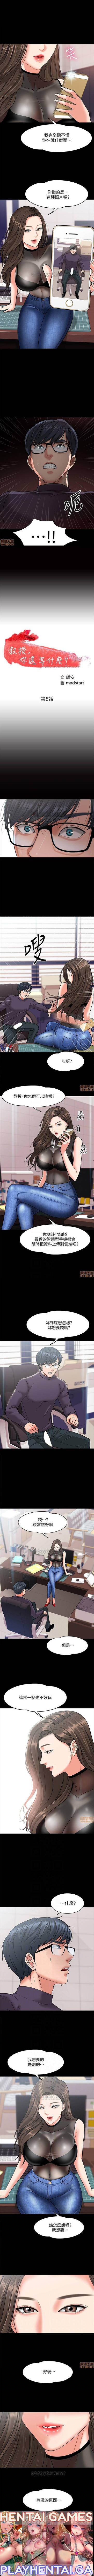 Footjob PROFESSOR, ARE YOU JUST GOING TO LOOK AT ME? | DESIRE SWAMP | 教授，你還等什麼? Ch. 5 [Chinese] Manhwa Granny - Page 2